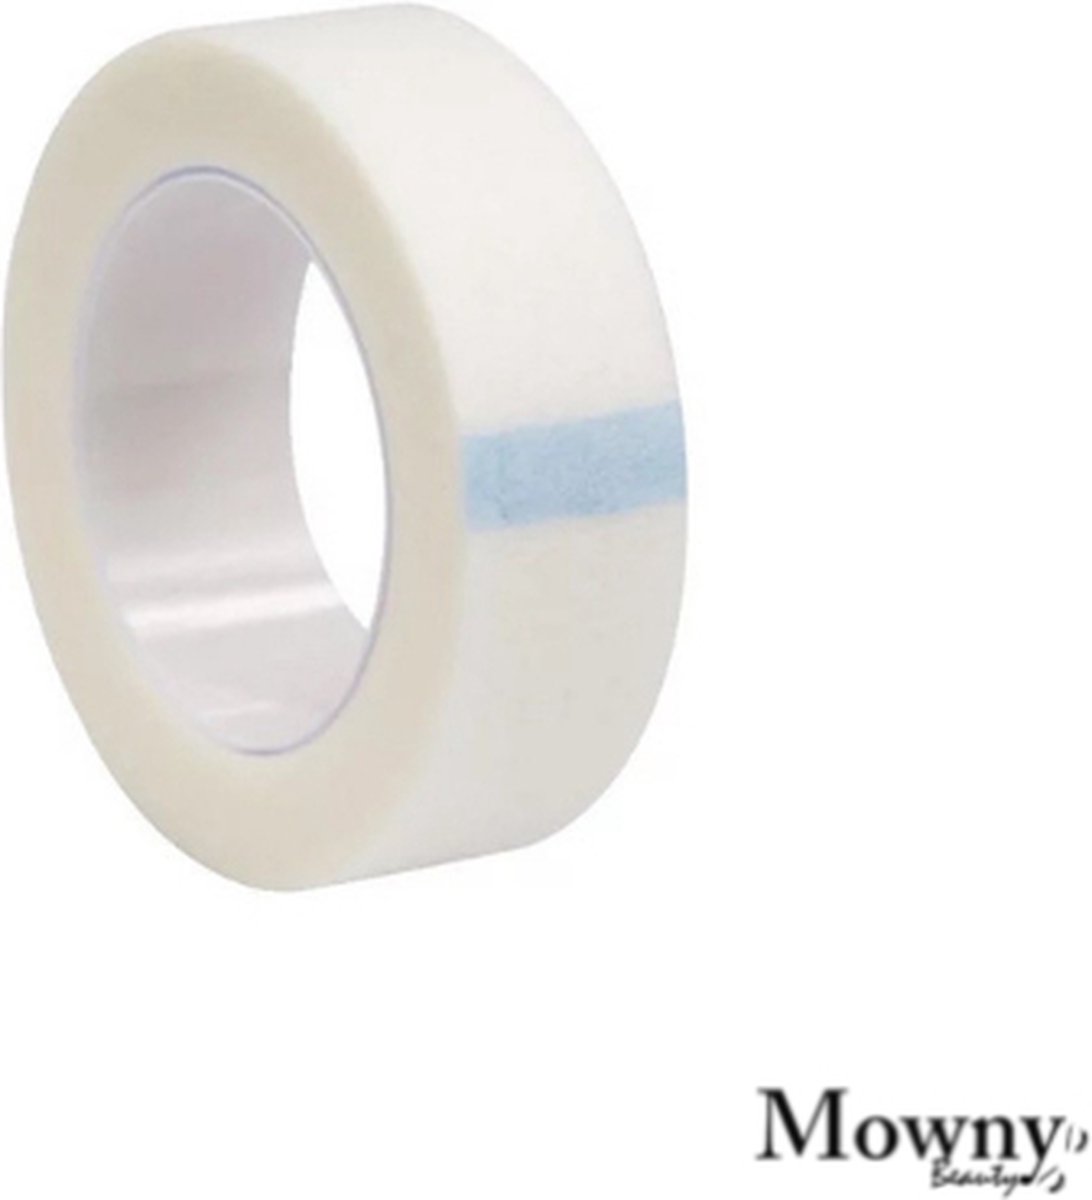 Mowny Beauty - 3x micropore wimpertape - 3x paper wimpertape - wit - 3 stuks